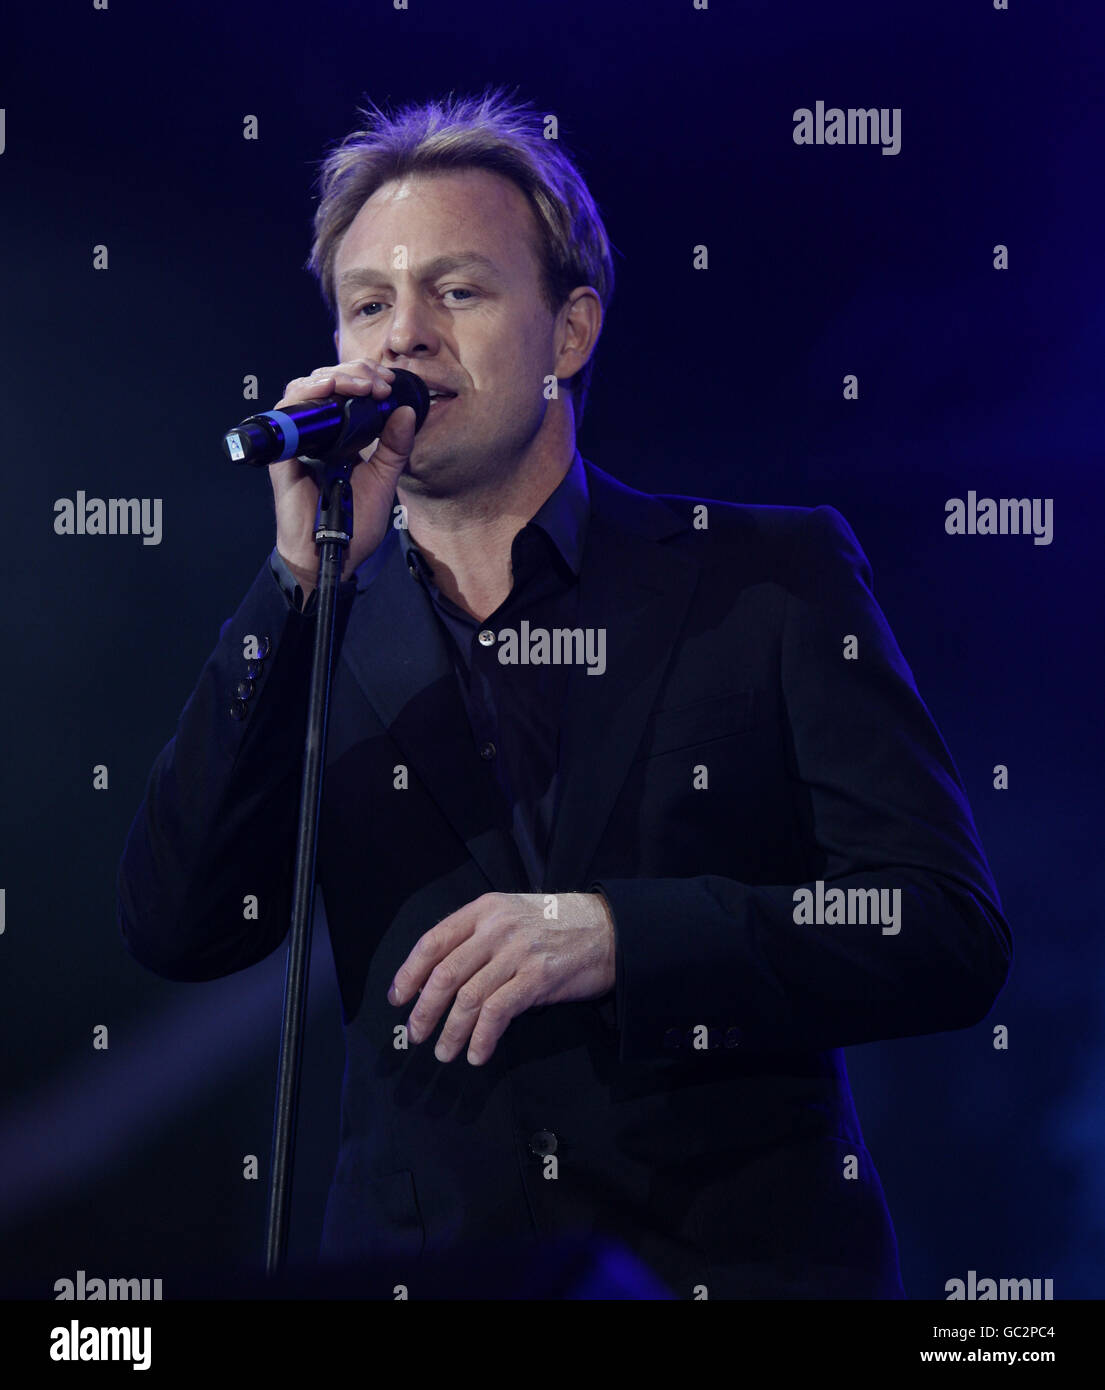 Jason Donovan on stage during BBC Radio 2's 'Thank You For The Music, A Celebration of the Music of ABBA' show, in Hyde Park central London. Stock Photo